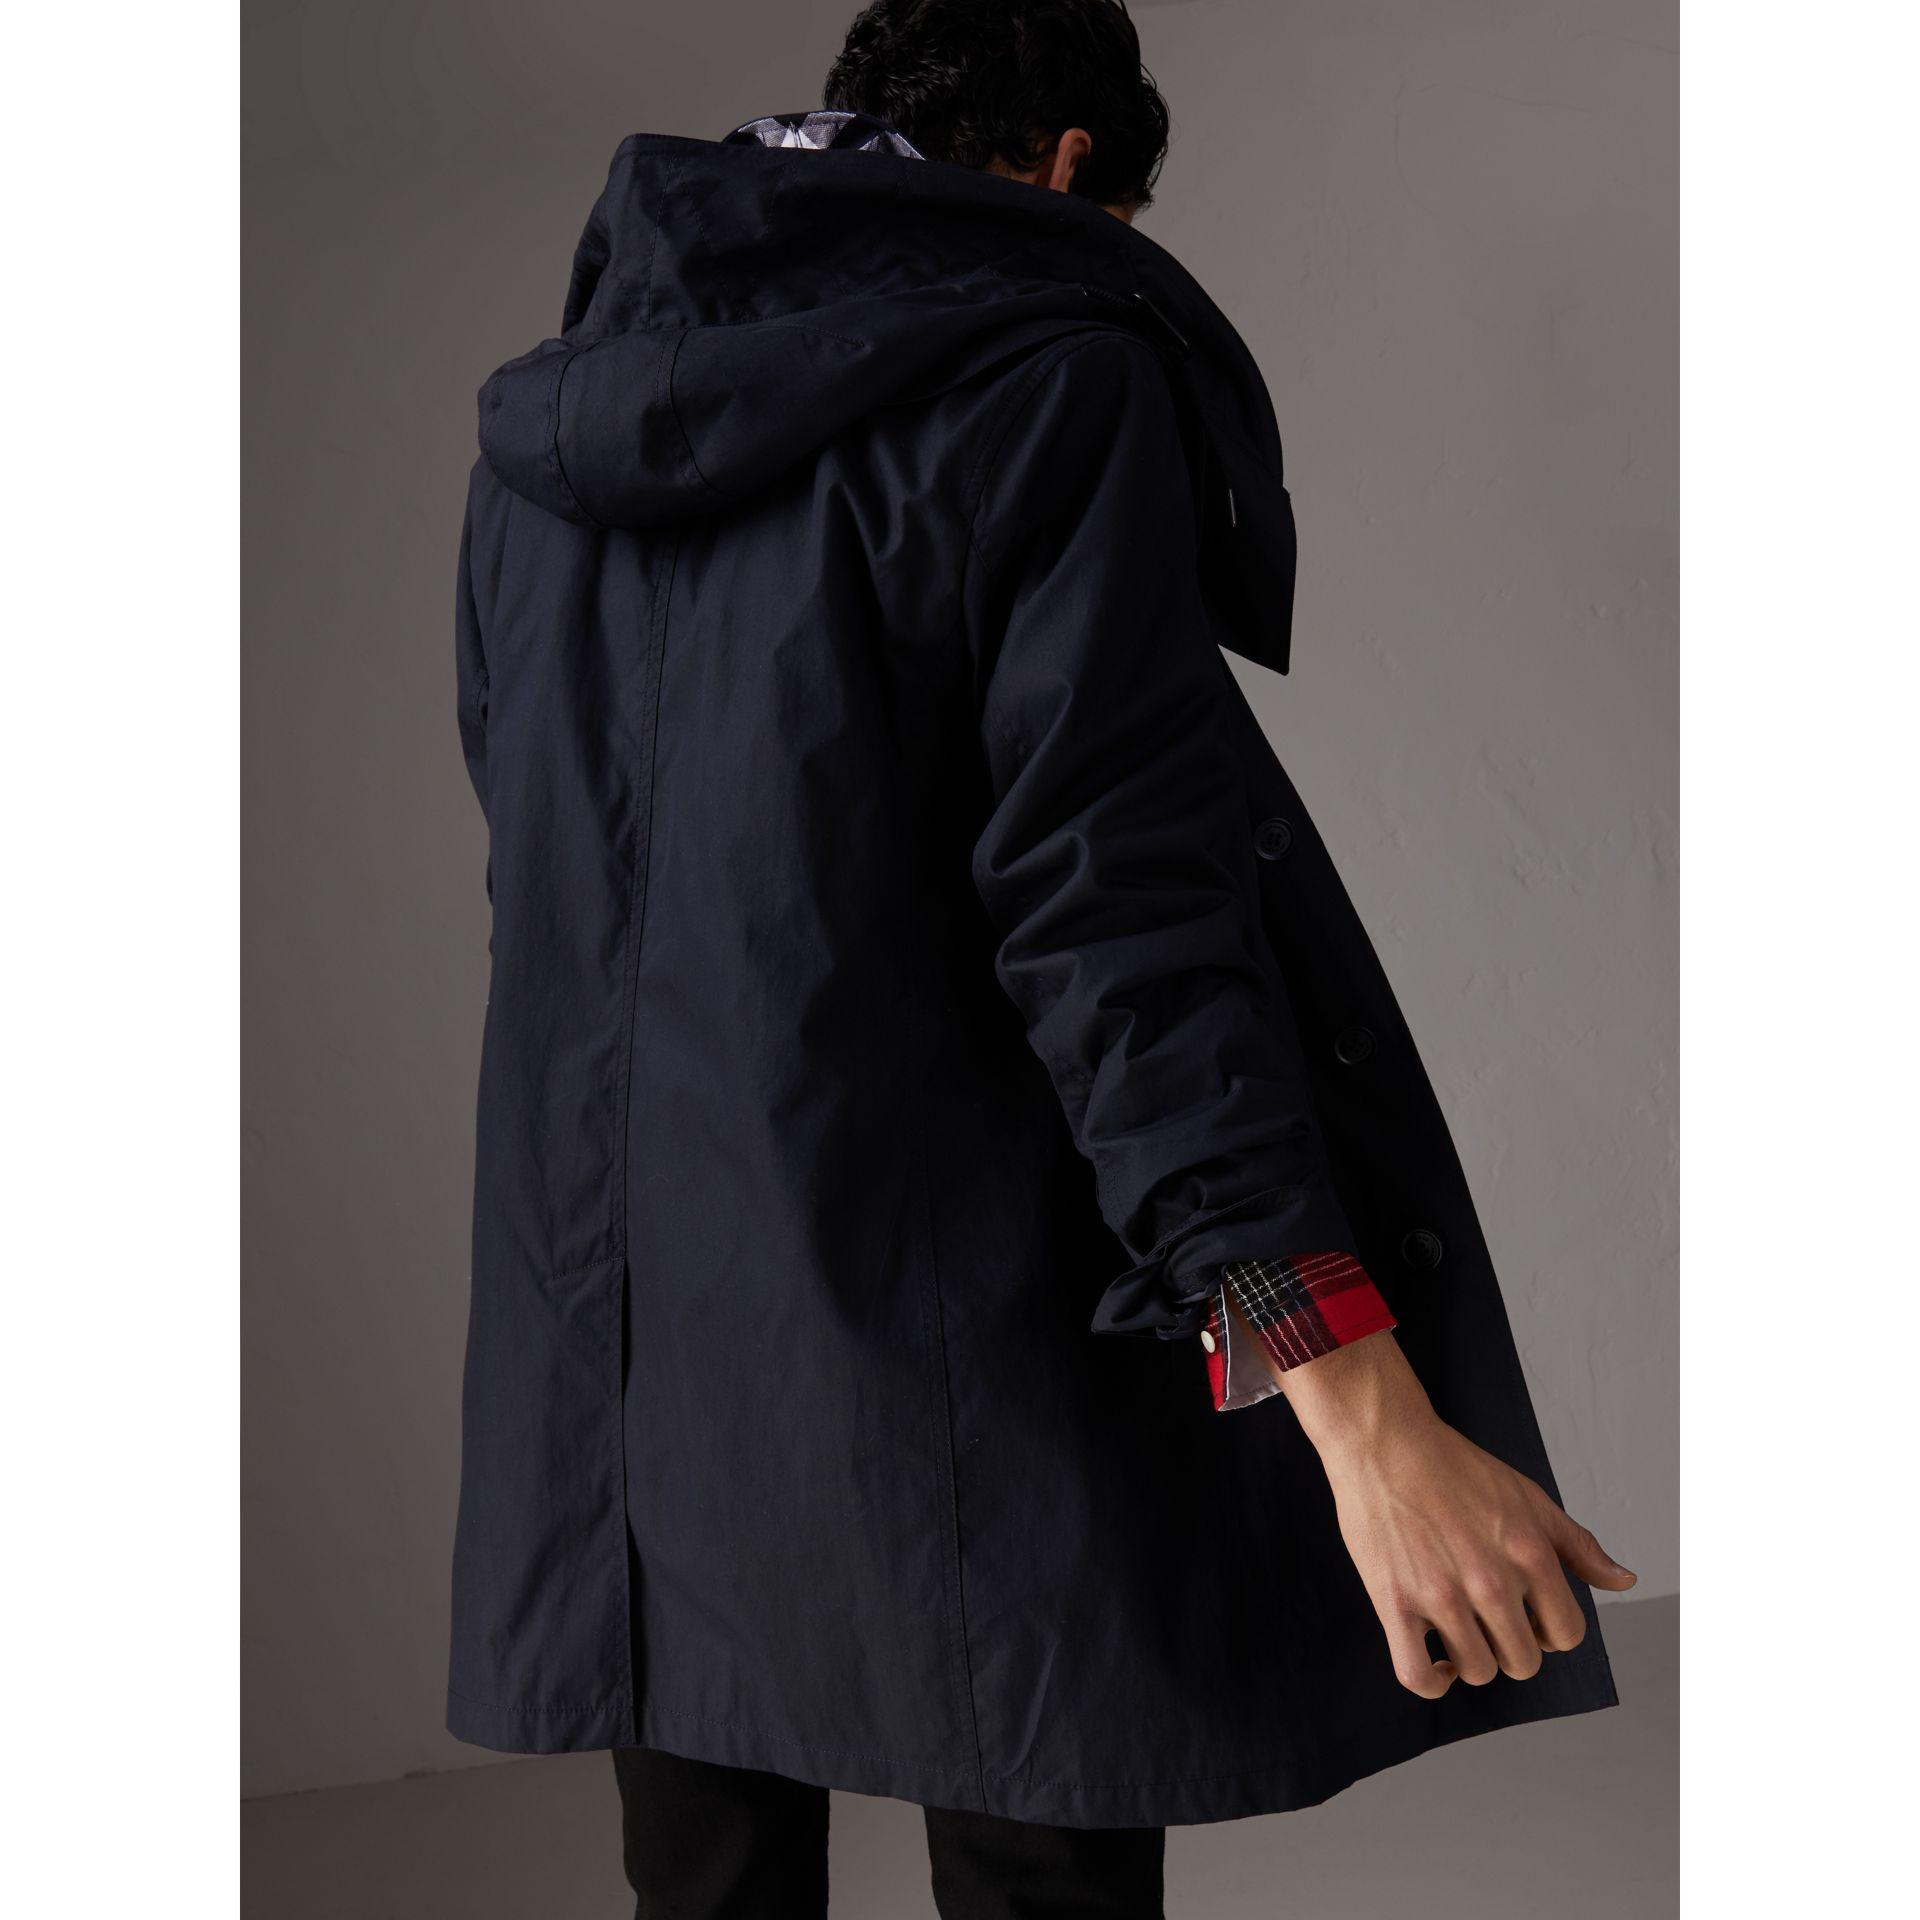 Burberry Detachable Hood Cotton Blend Car Coat With Warmer in Navy (Blue)  for Men - Lyst